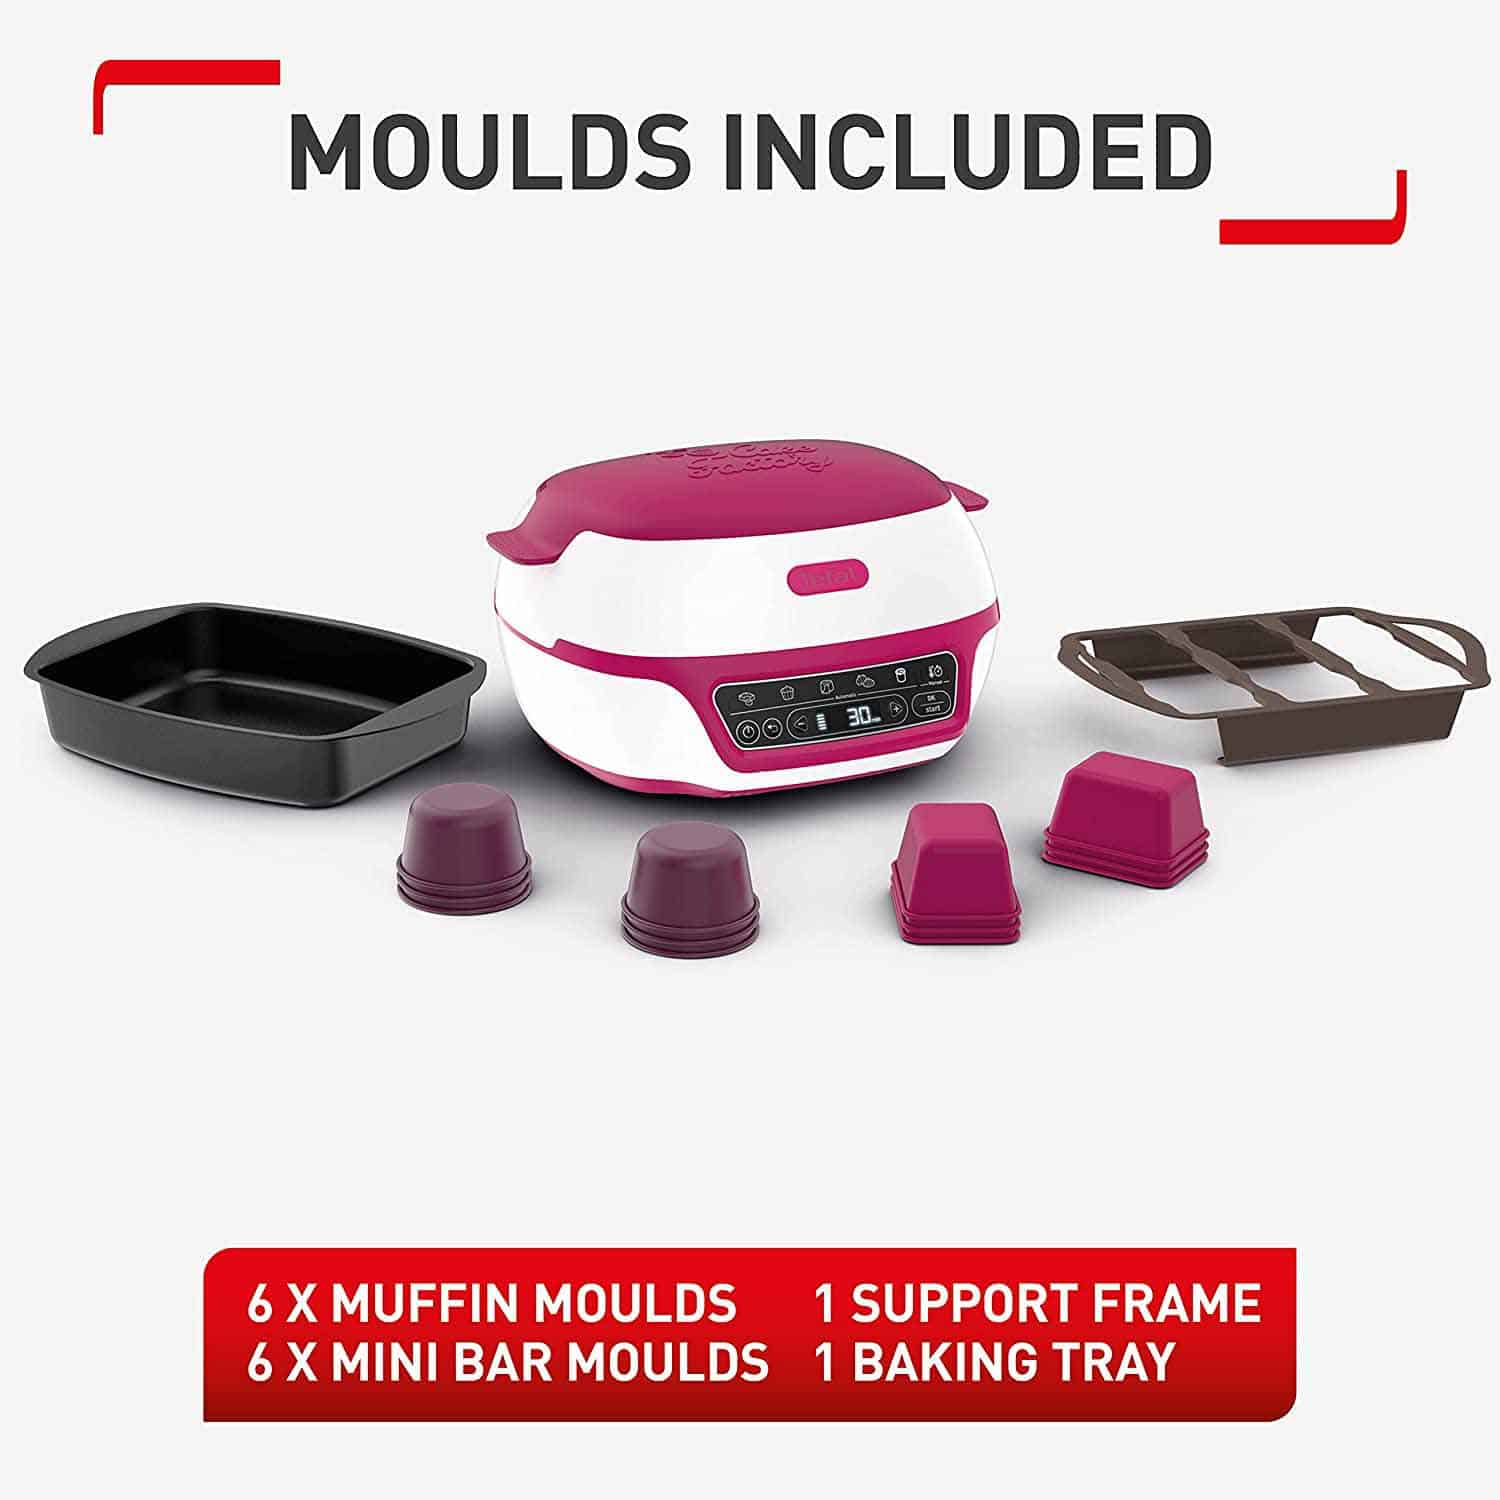 Festive baking made easy with the Tefal Cake Factory Delices